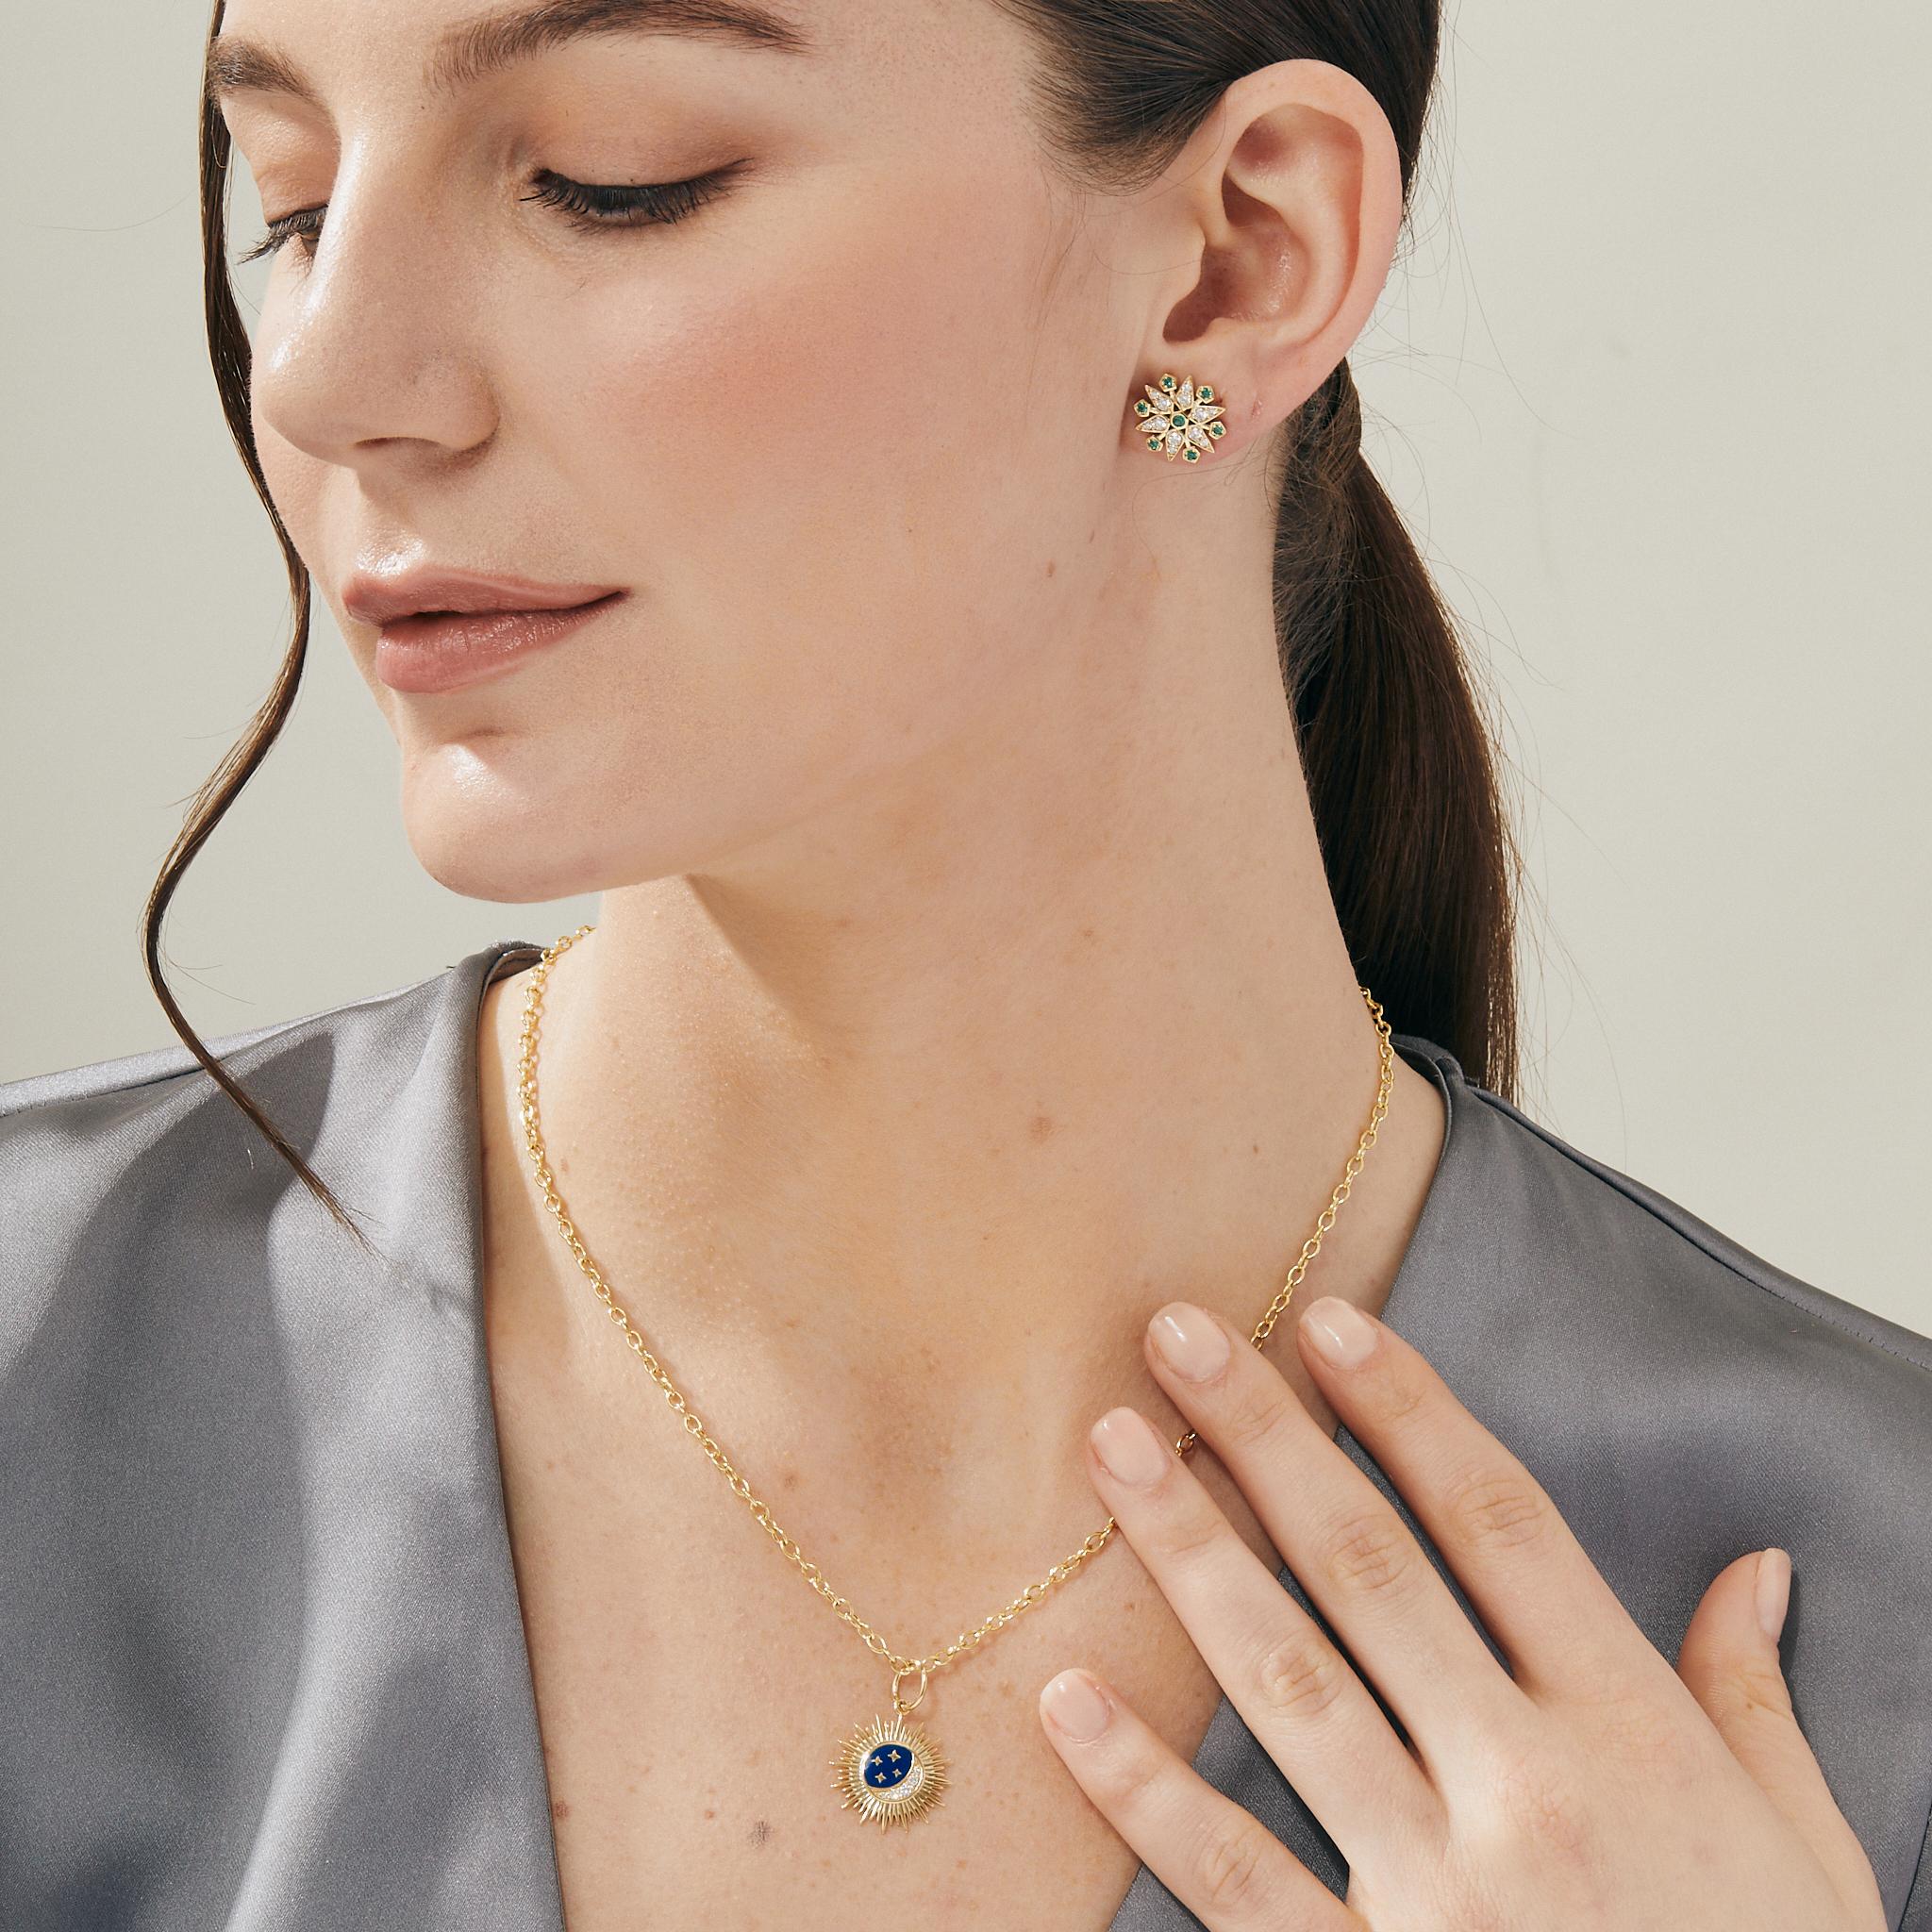 Created in 18 karat yellow gold
Lapis enamel details
Diamonds 0.06 carat approx.
Chain sold separately 
Limited edition

Crafted in lucent 18 karat yellow gold, this pendant features splendid lapis enamel detailing and scintillates with 0.06 carats